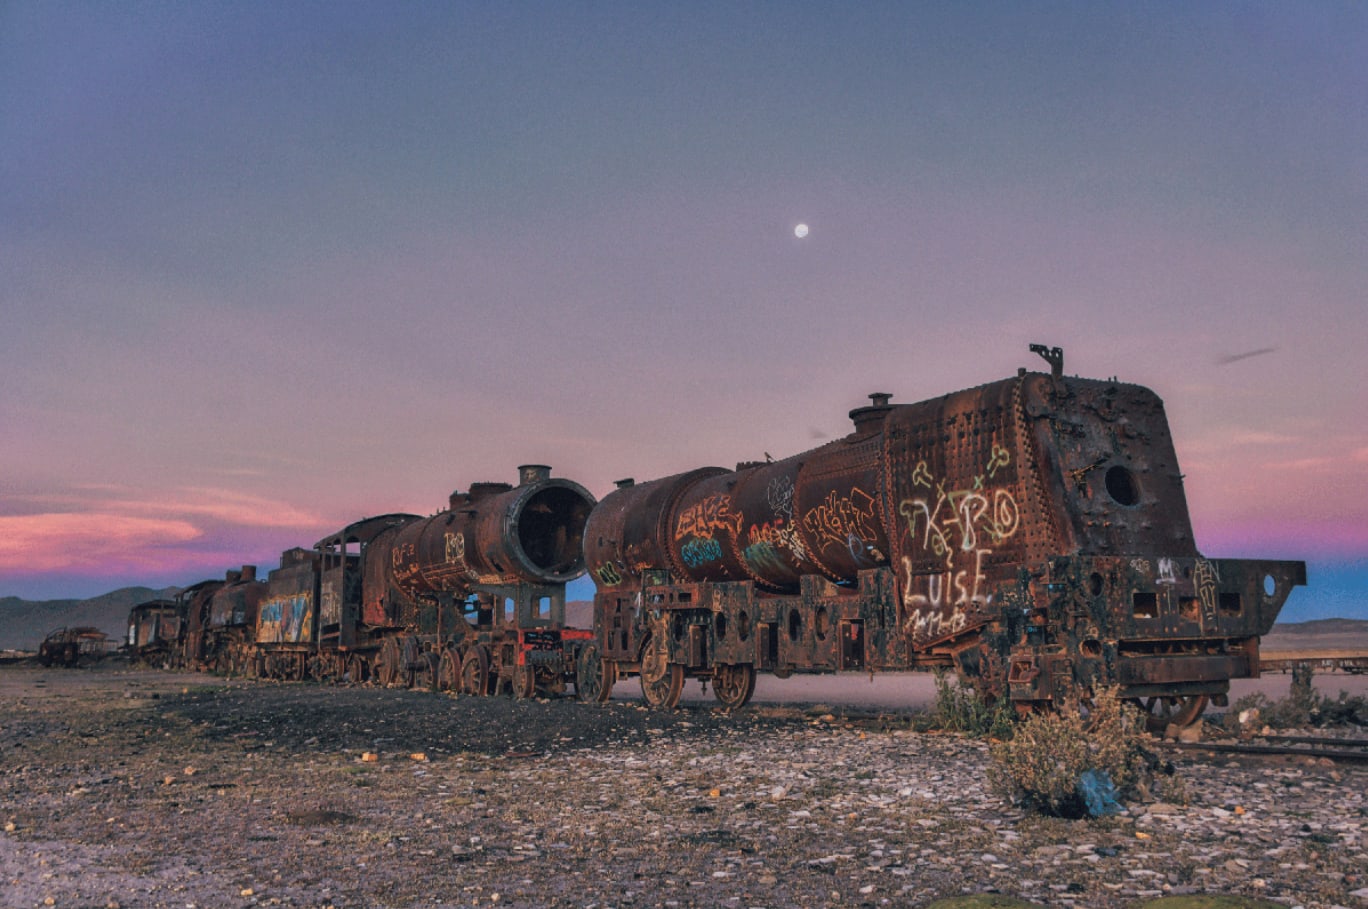 The Great Train Graveyard in Bolivia